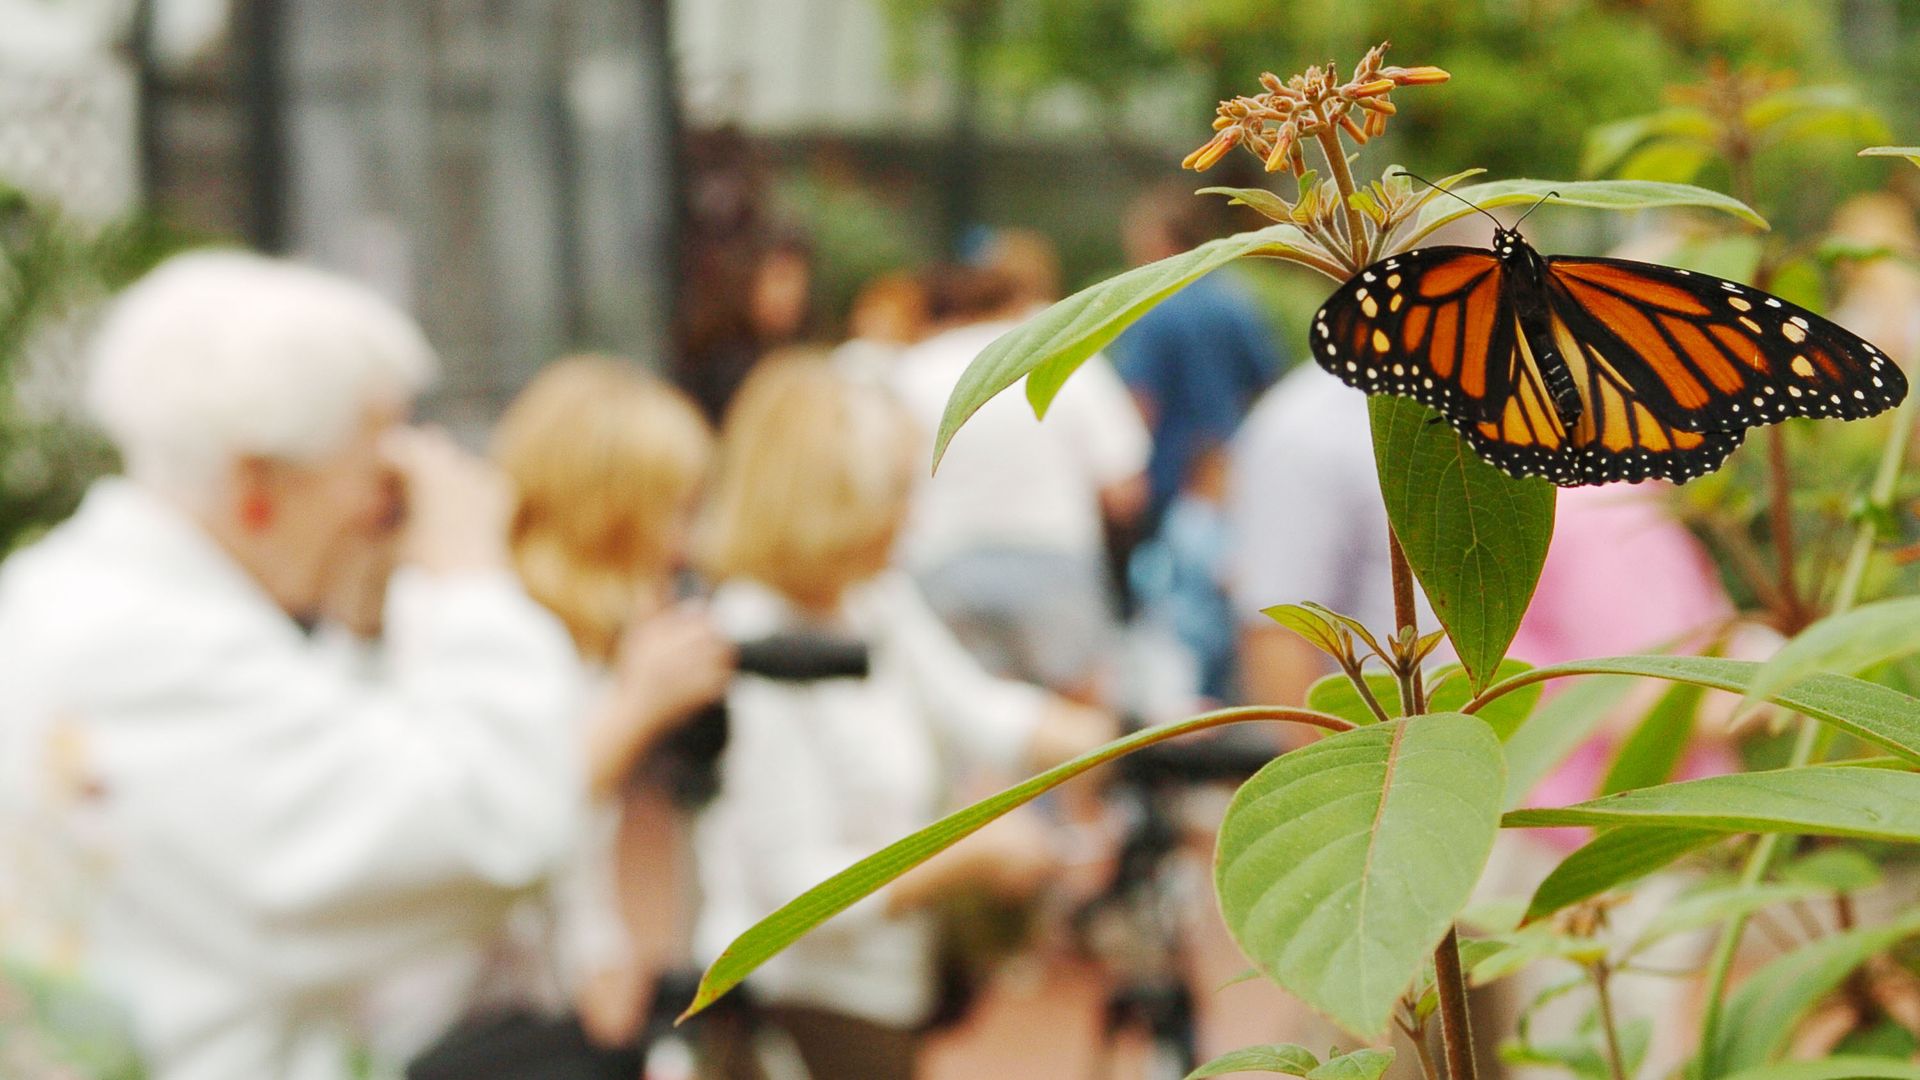 A Monarch butterfly on a plant.